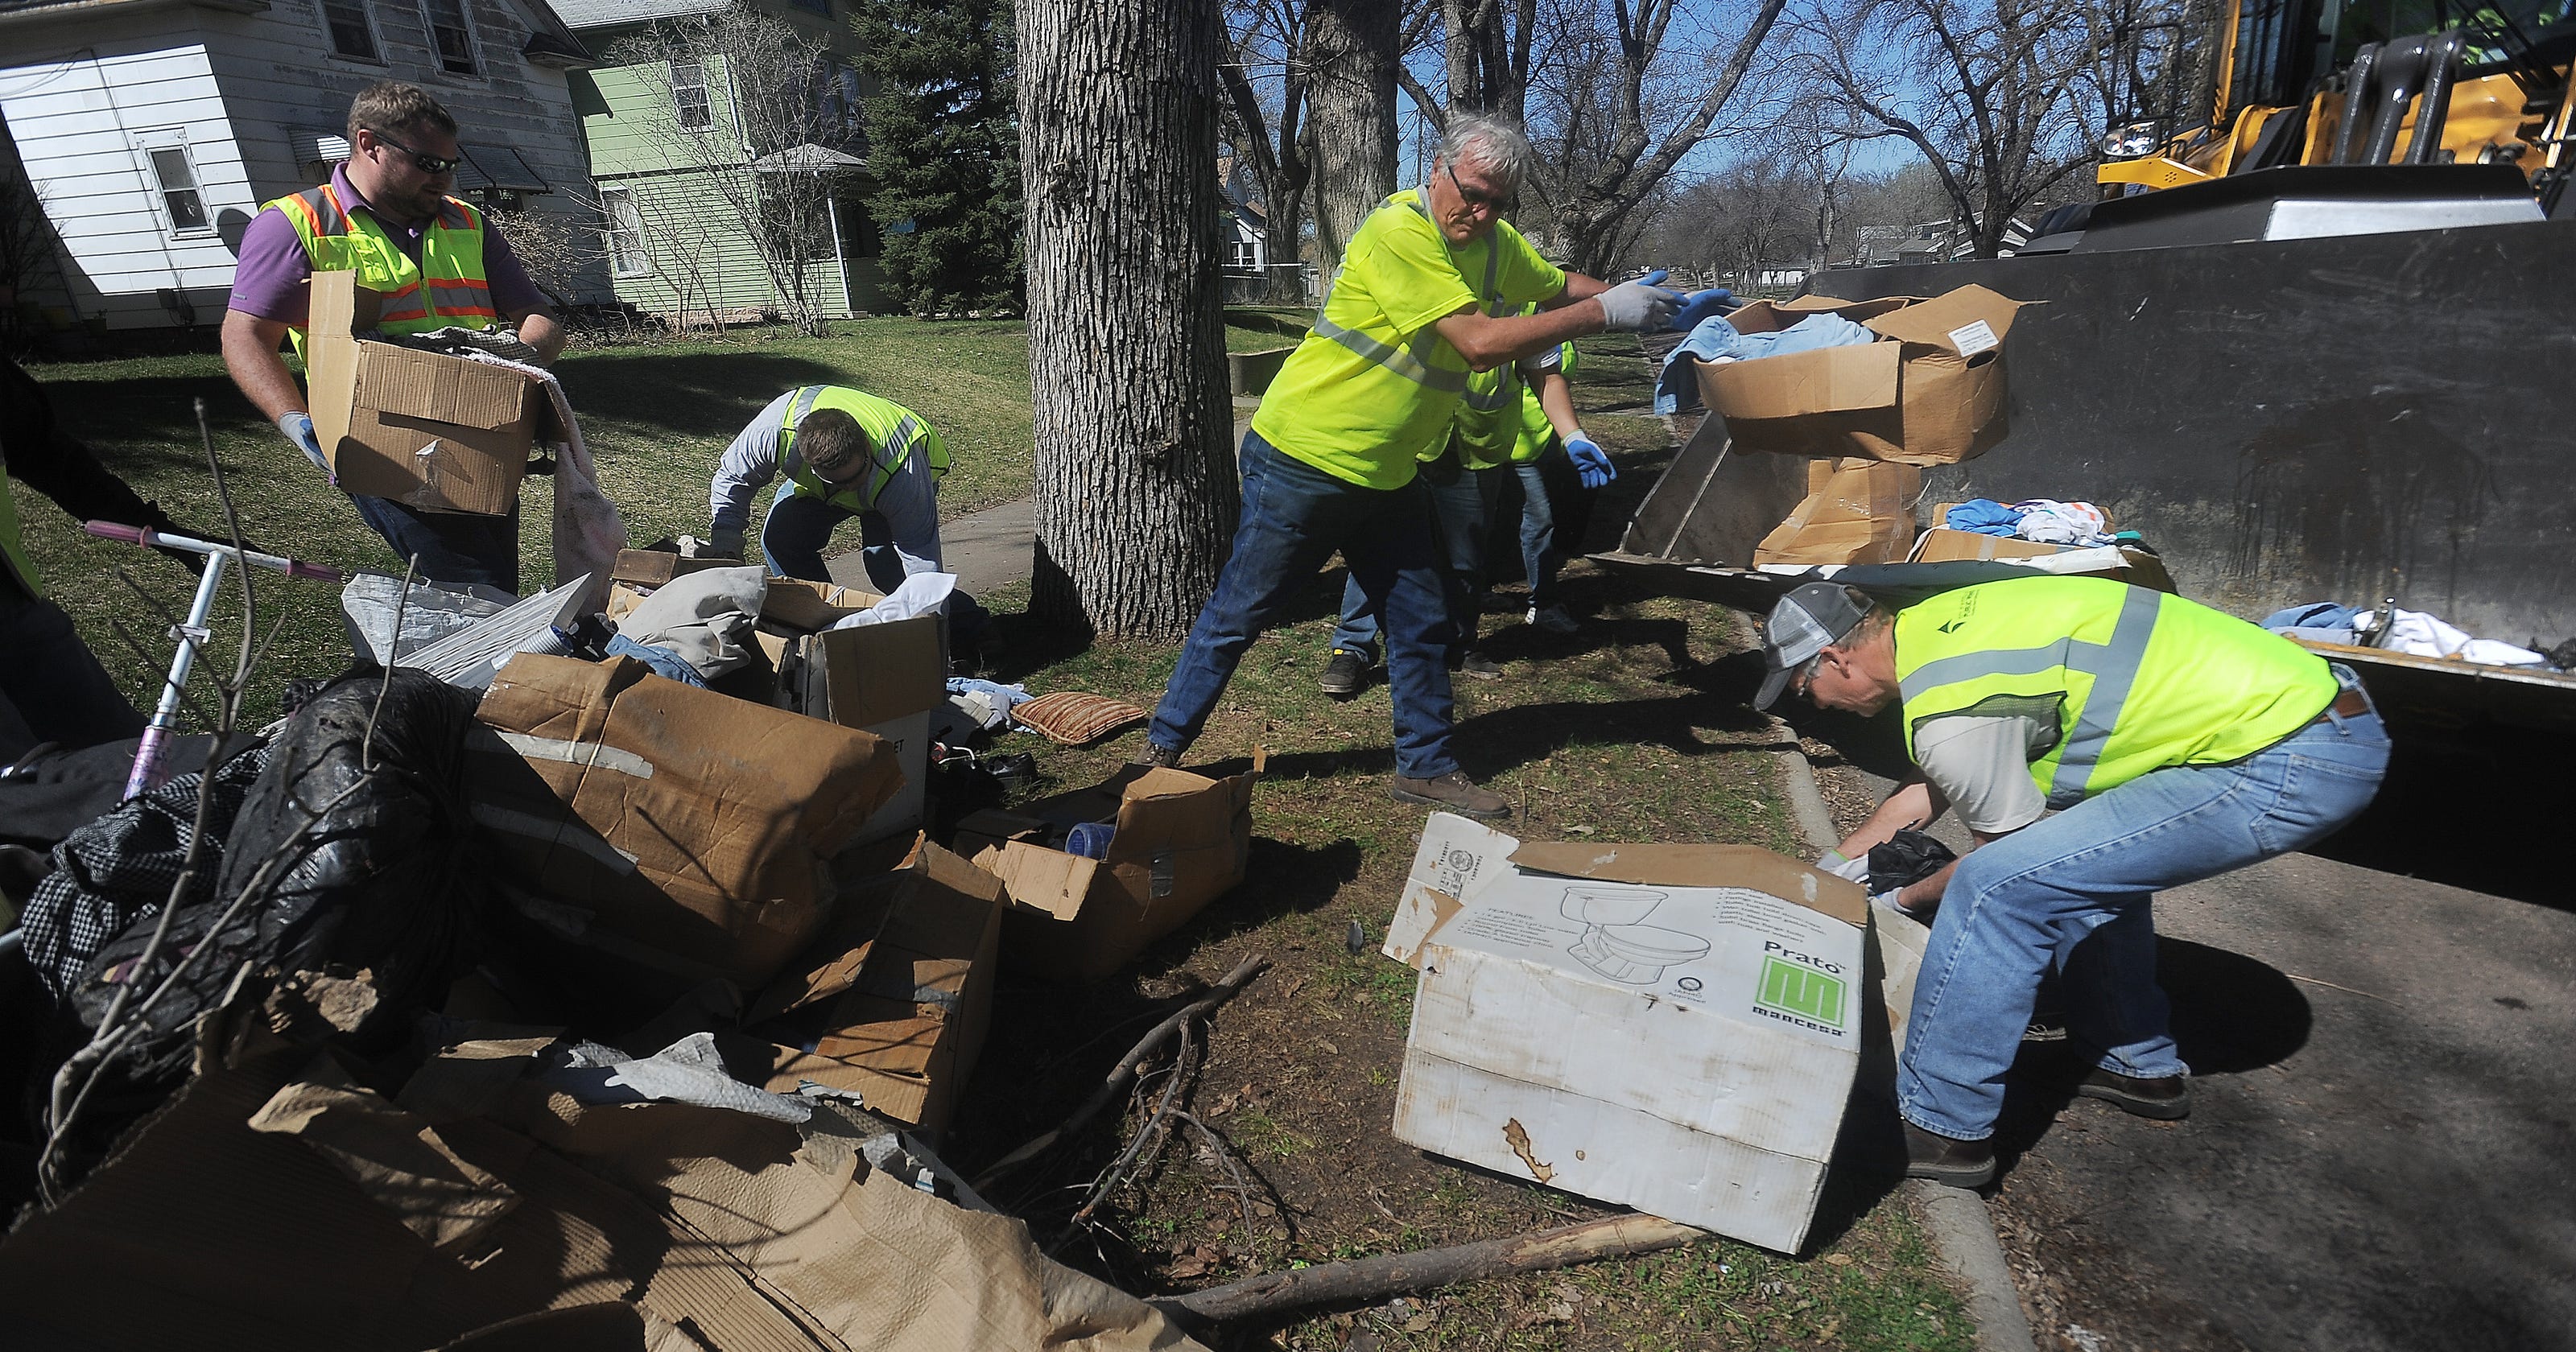 Sioux Falls Project NICE/KEEP neighborhood cleanup this week